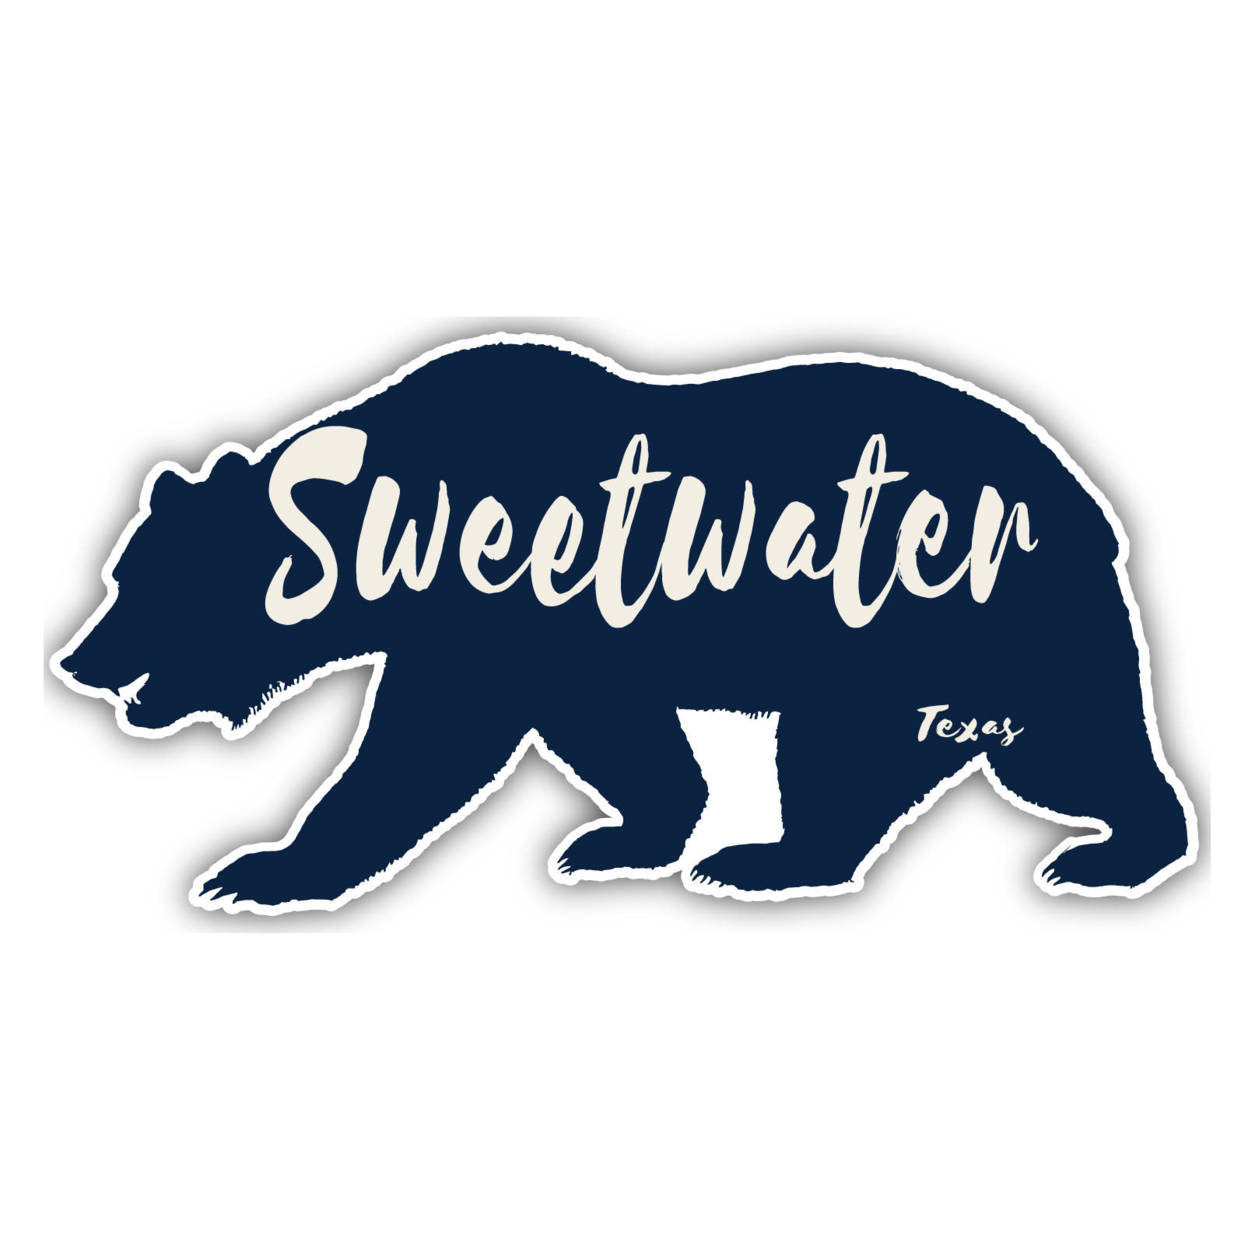 Sweetwater Texas Souvenir Decorative Stickers (Choose Theme And Size) - Single Unit, 4-Inch, Adventures Awaits